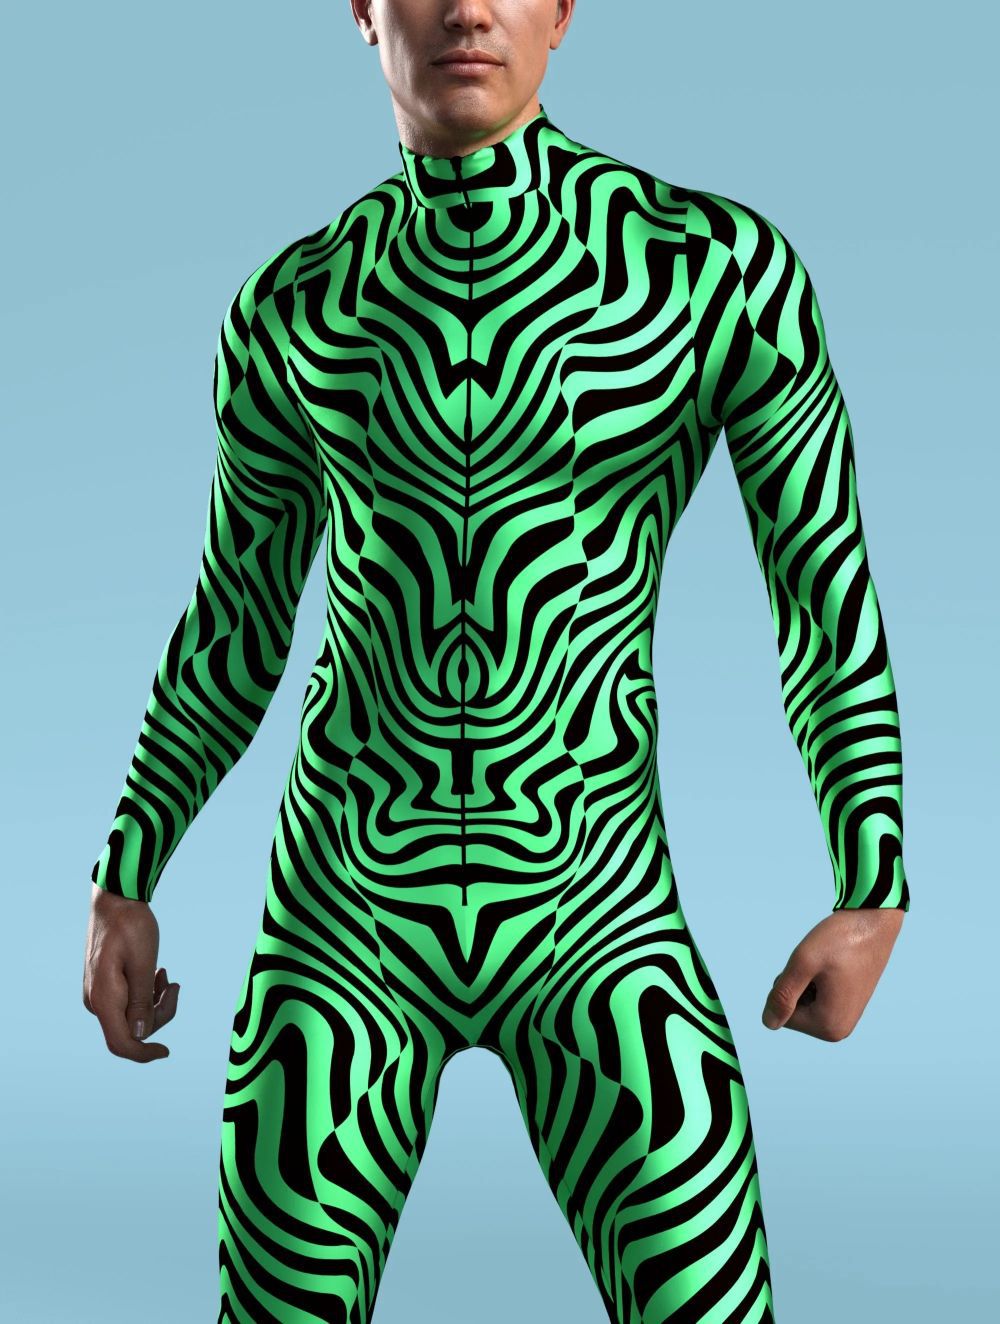 Person wearing a full-body, green and black striped Maramalive™ Halloween Tights 3D Digital Printing Cos One-piece Play Costume with a complex, geometric pattern, standing against a plain blue background.